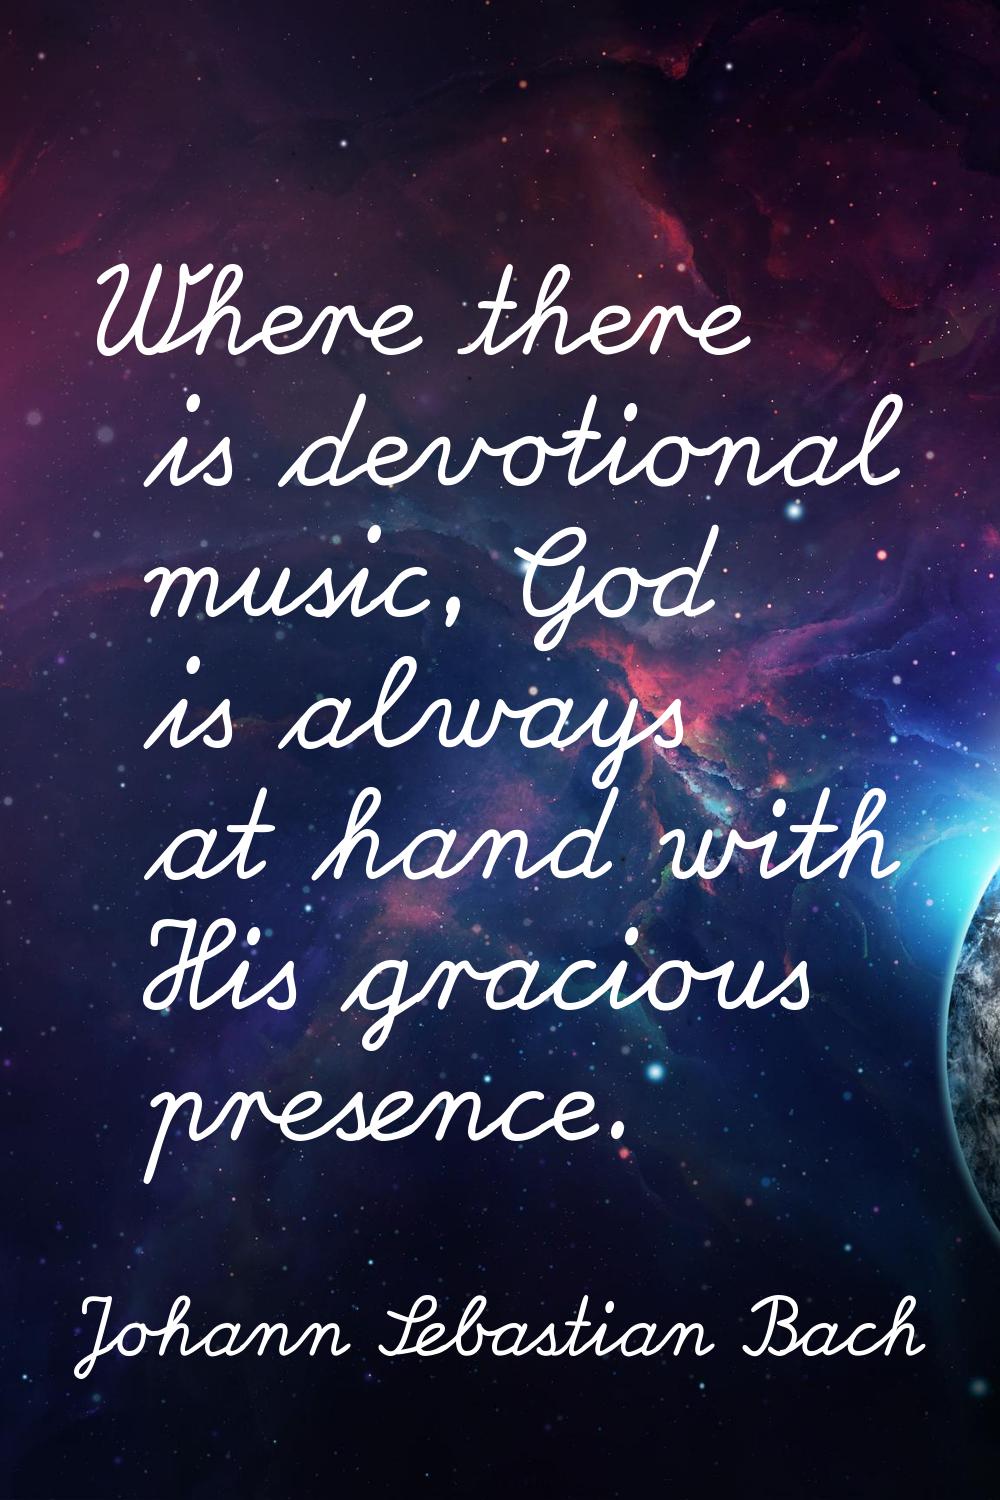 Where there is devotional music, God is always at hand with His gracious presence.